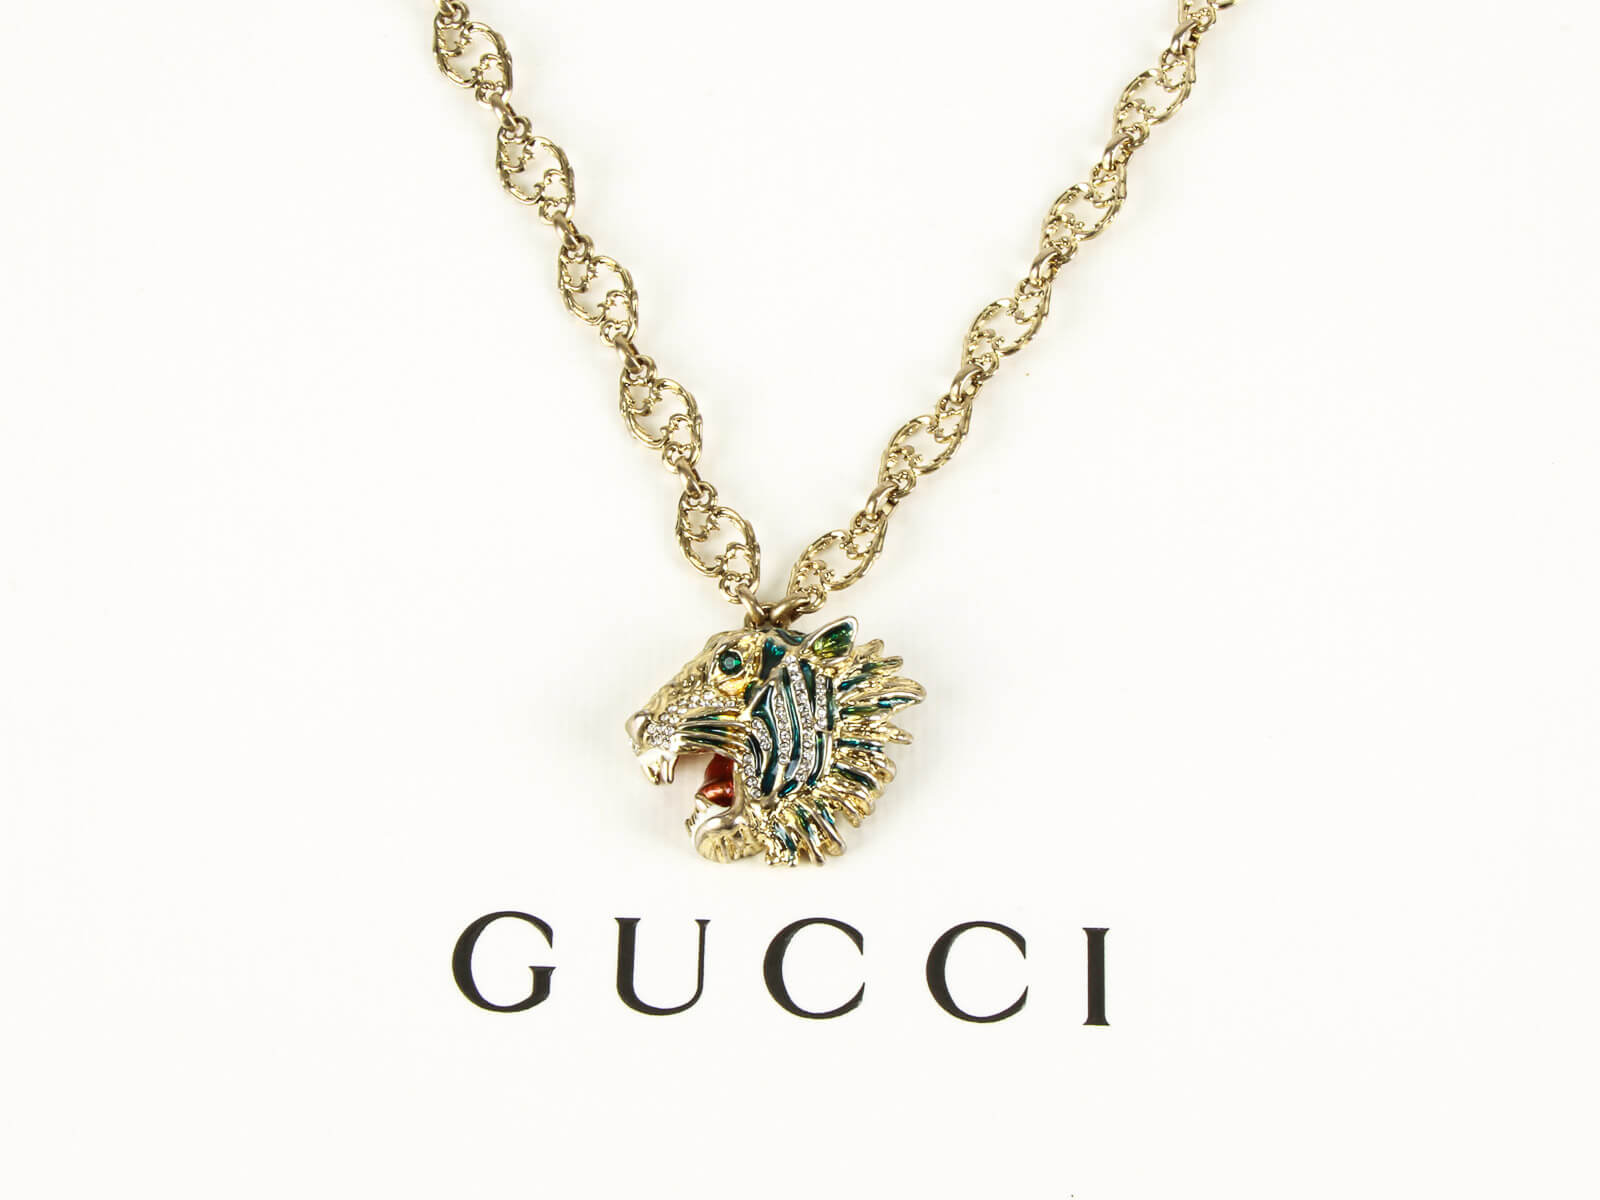 Gucci Enamel Necklace with Gucci Logo